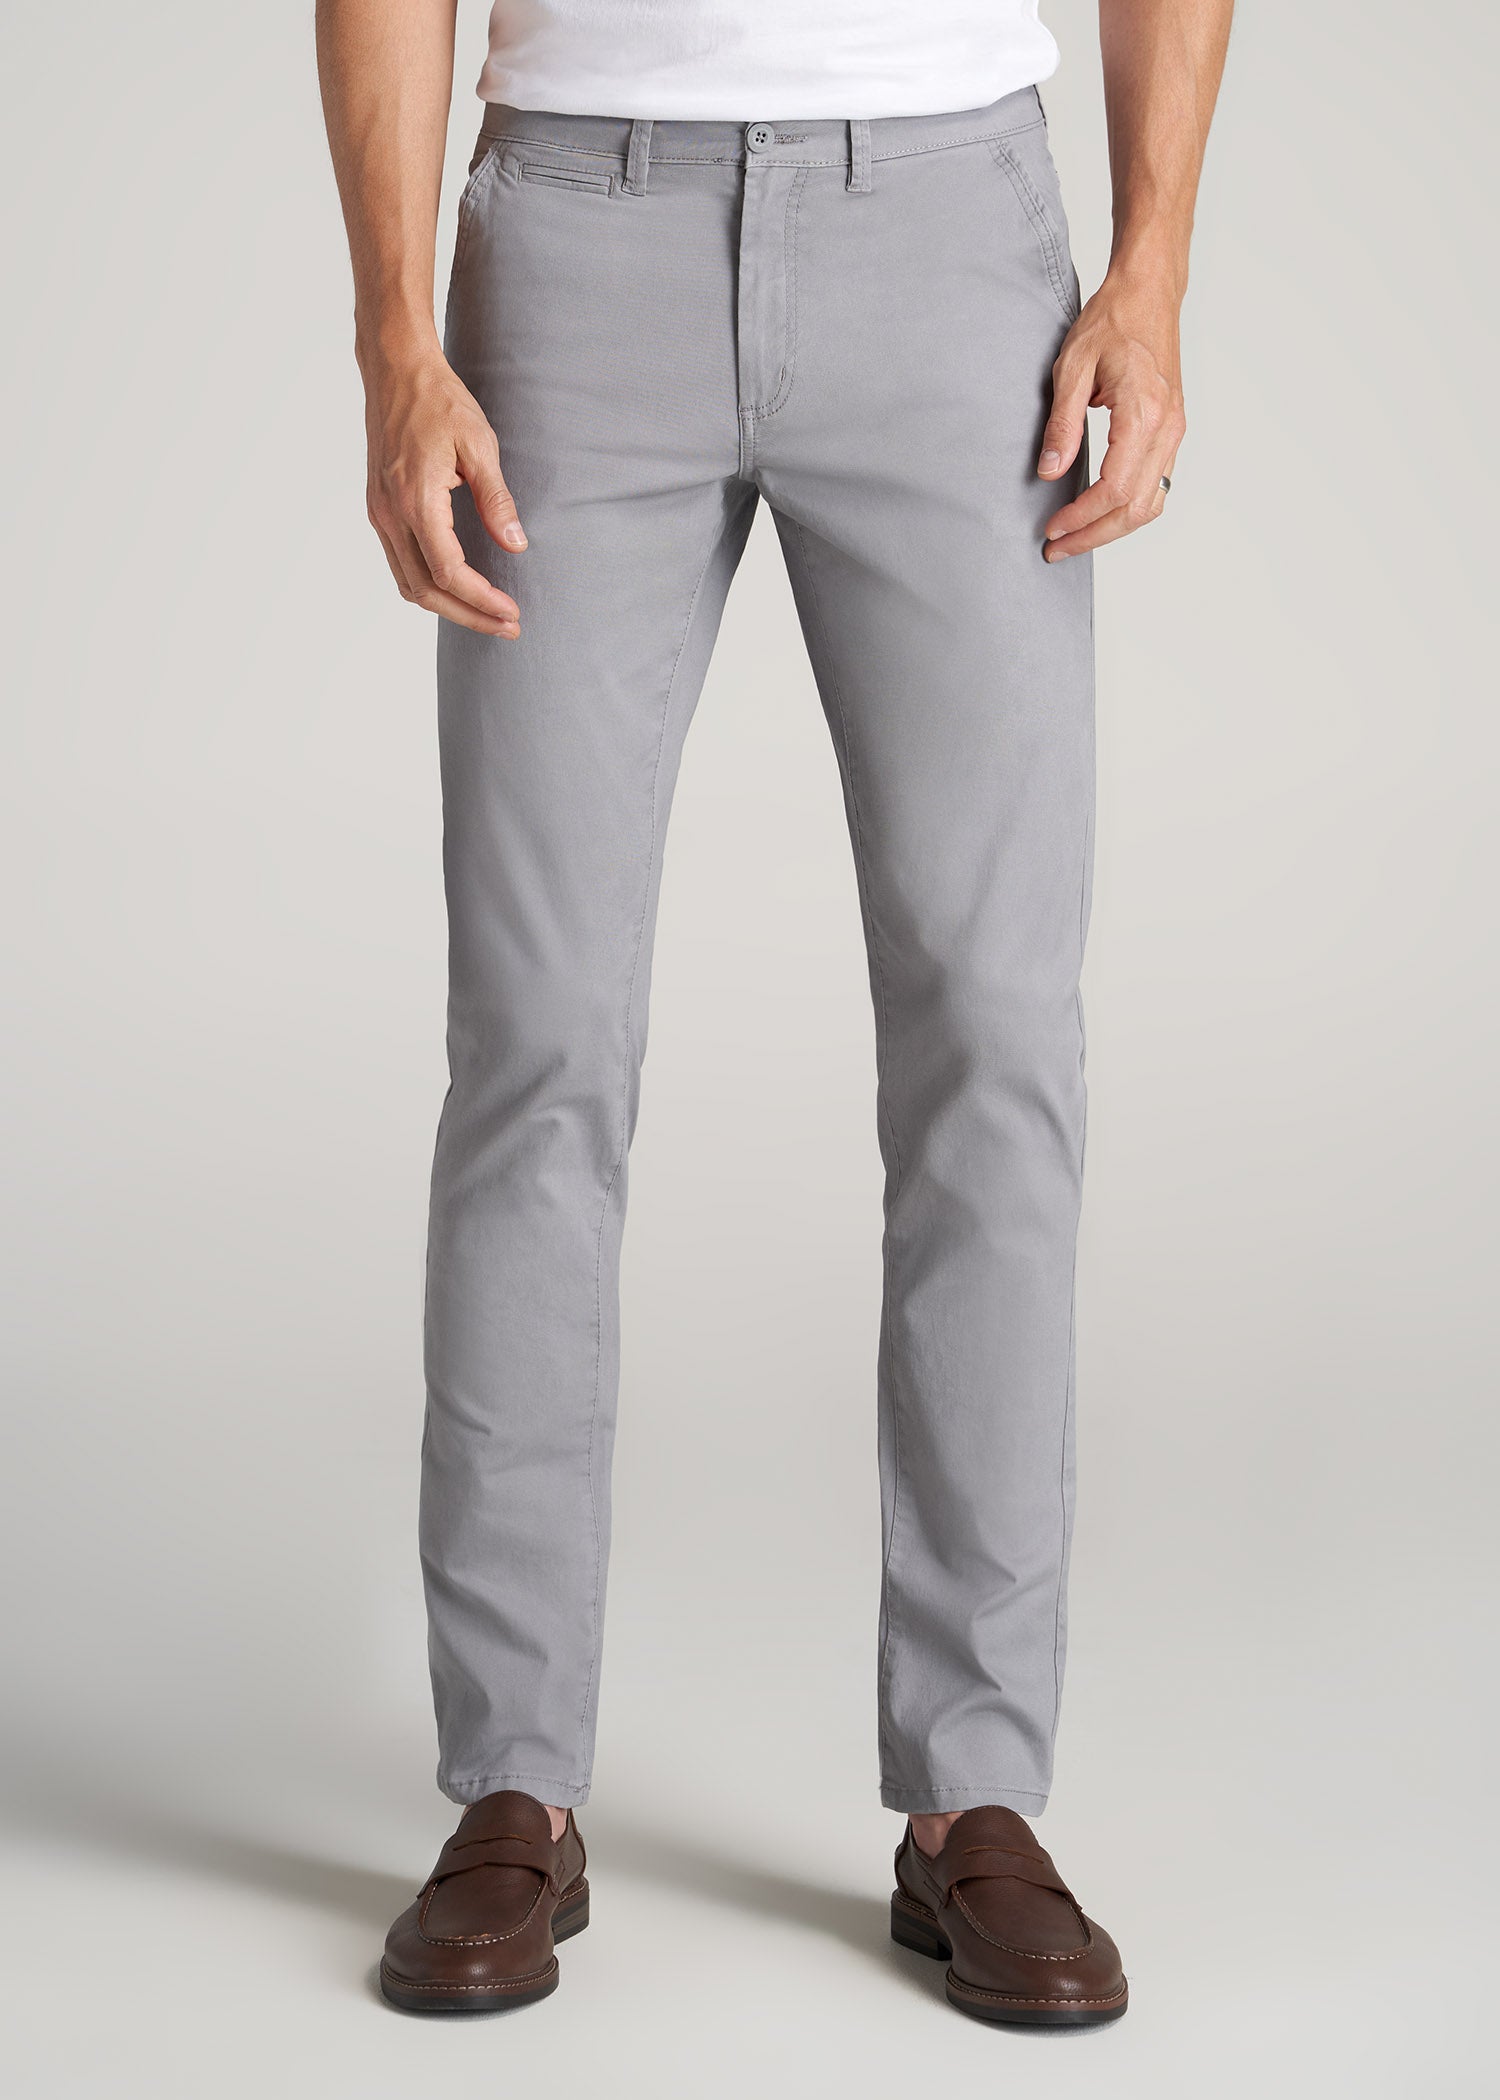 Carman TAPERED Chinos in Pebble Grey - Pants for Tall Men